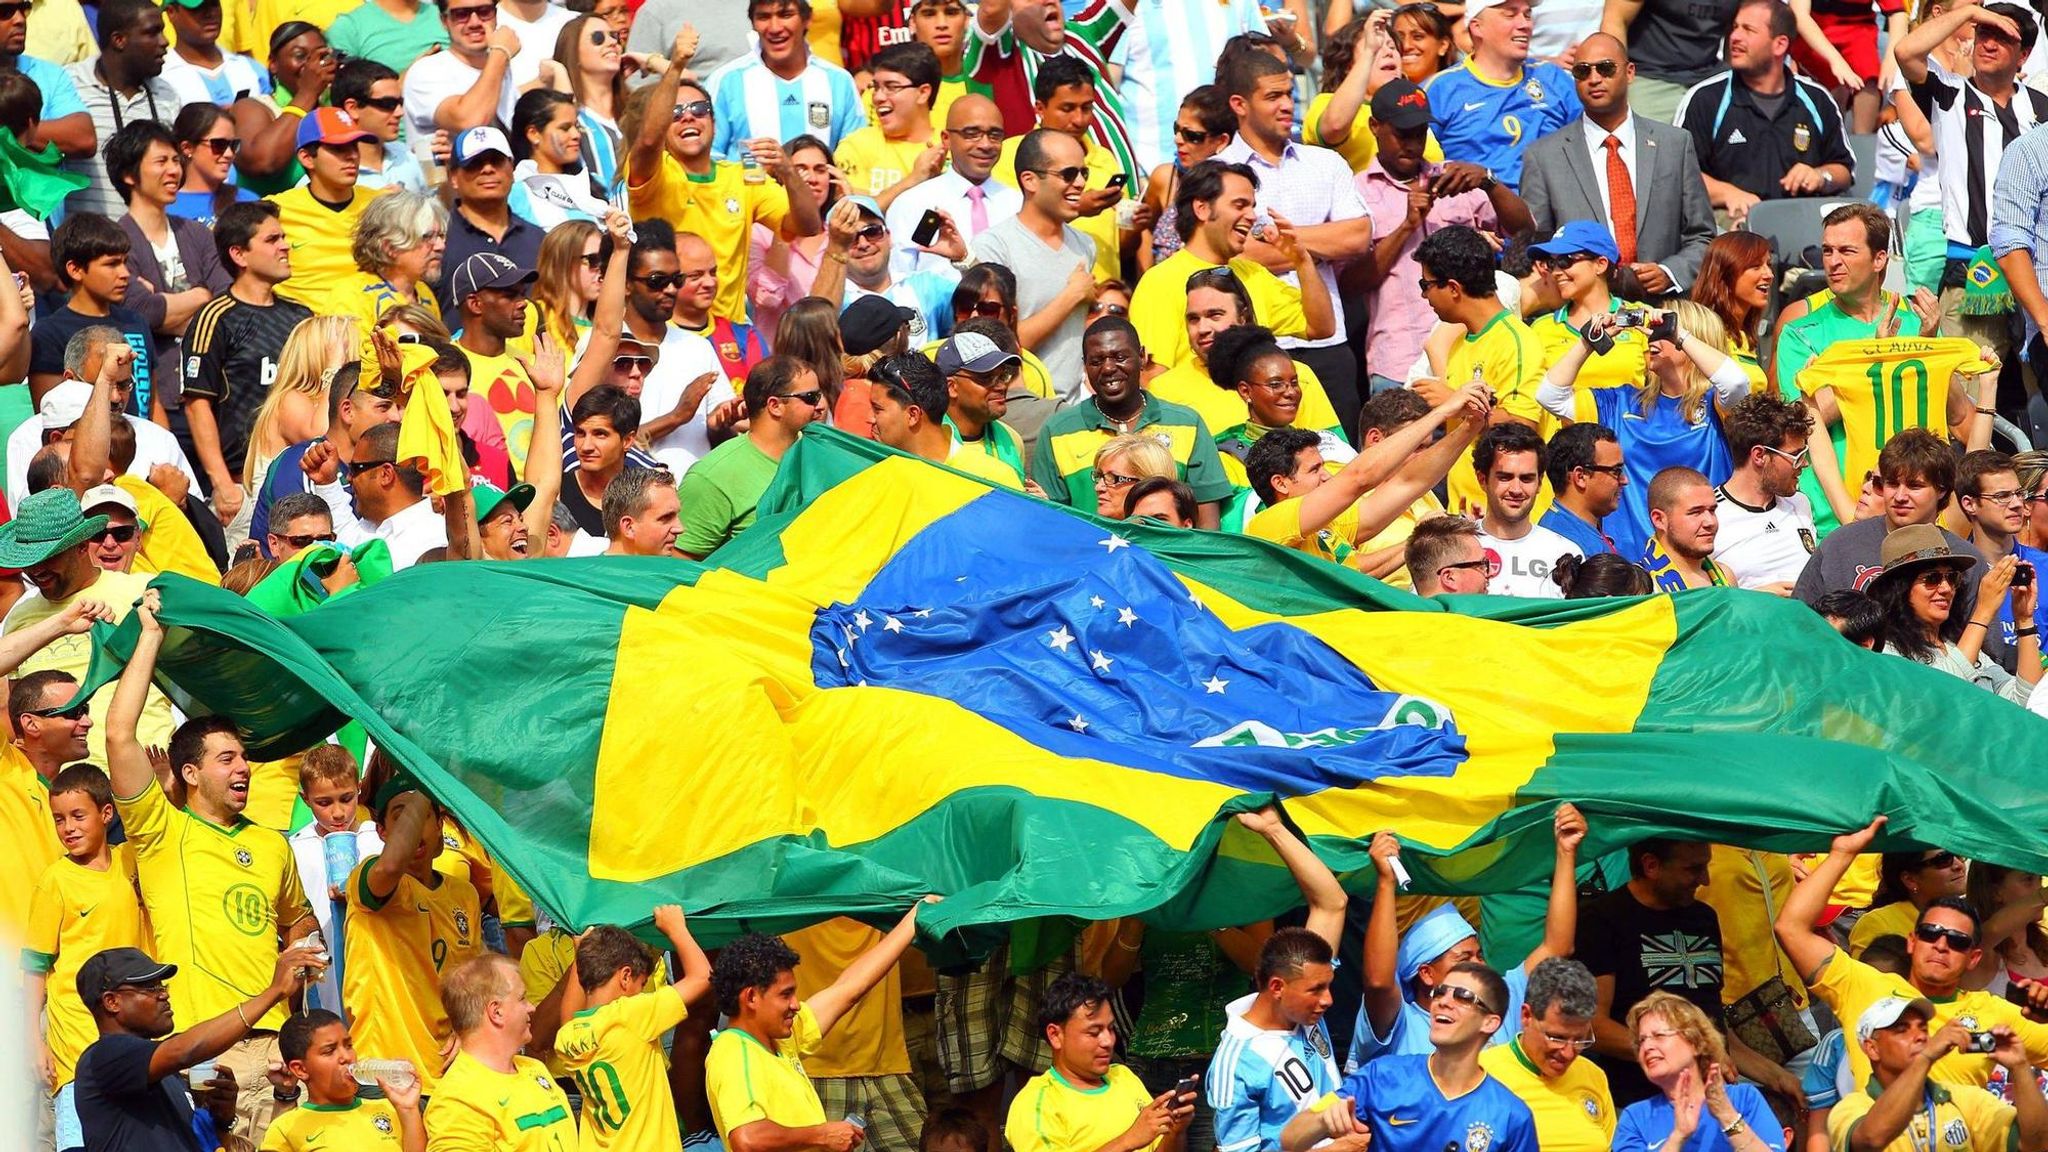 hurtig Tigge Fortæl mig World Cup: The demands of the Brazilian crowds has been a significant  factor in the exciting football we have seen | Football News | Sky Sports